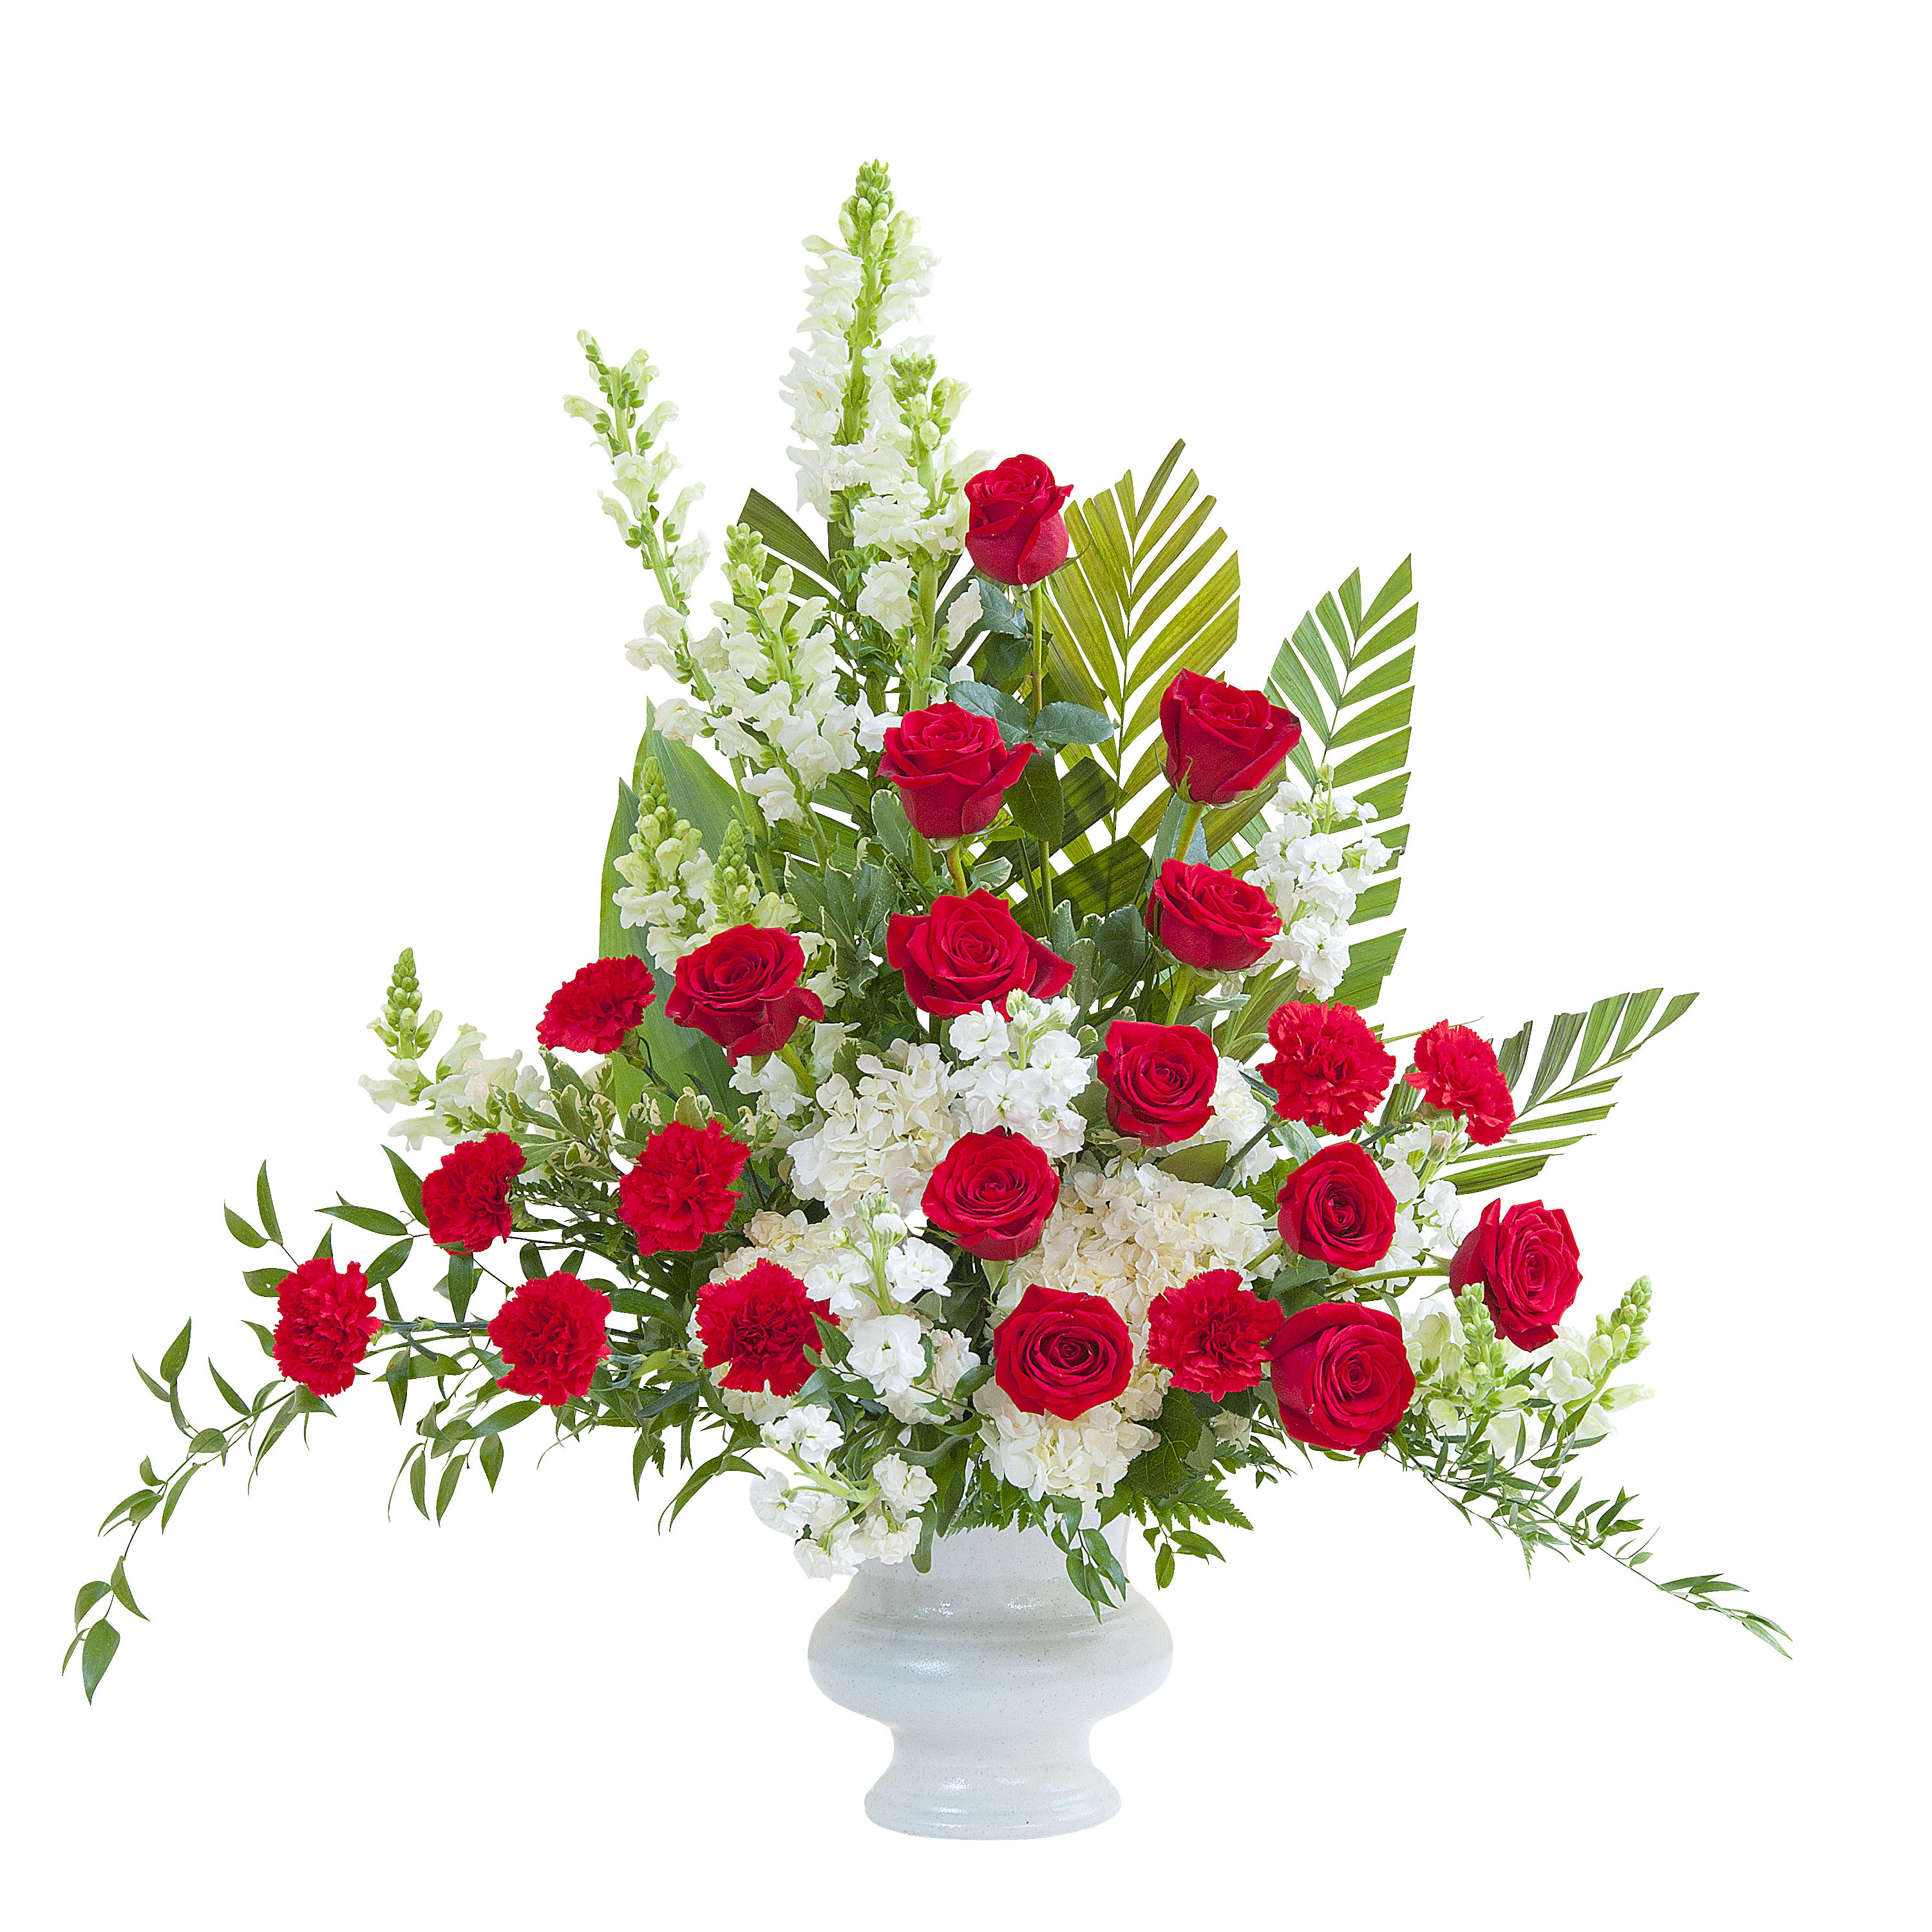 Enduring Strength Urn - Red and white premium varieties of flowers combine with lush foliage in this beautiful urn.